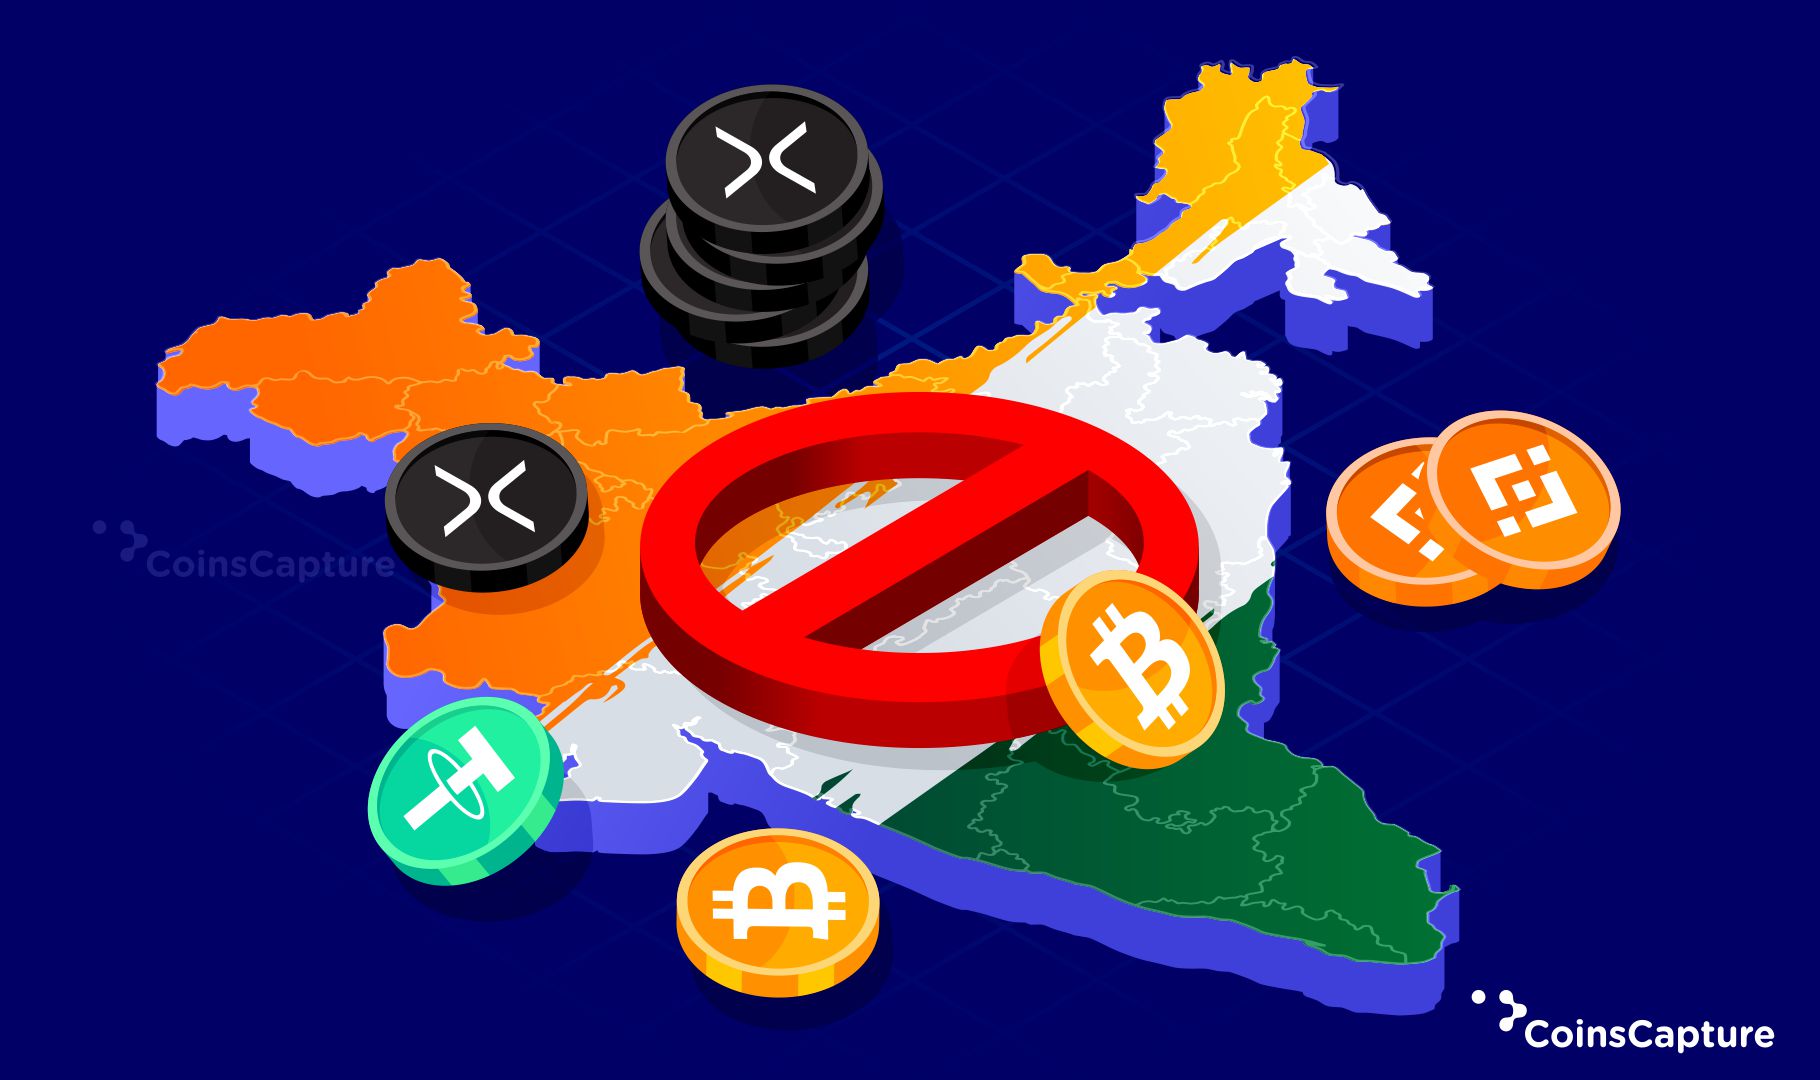 What Will Happen If India Bans Cryptocurrency?